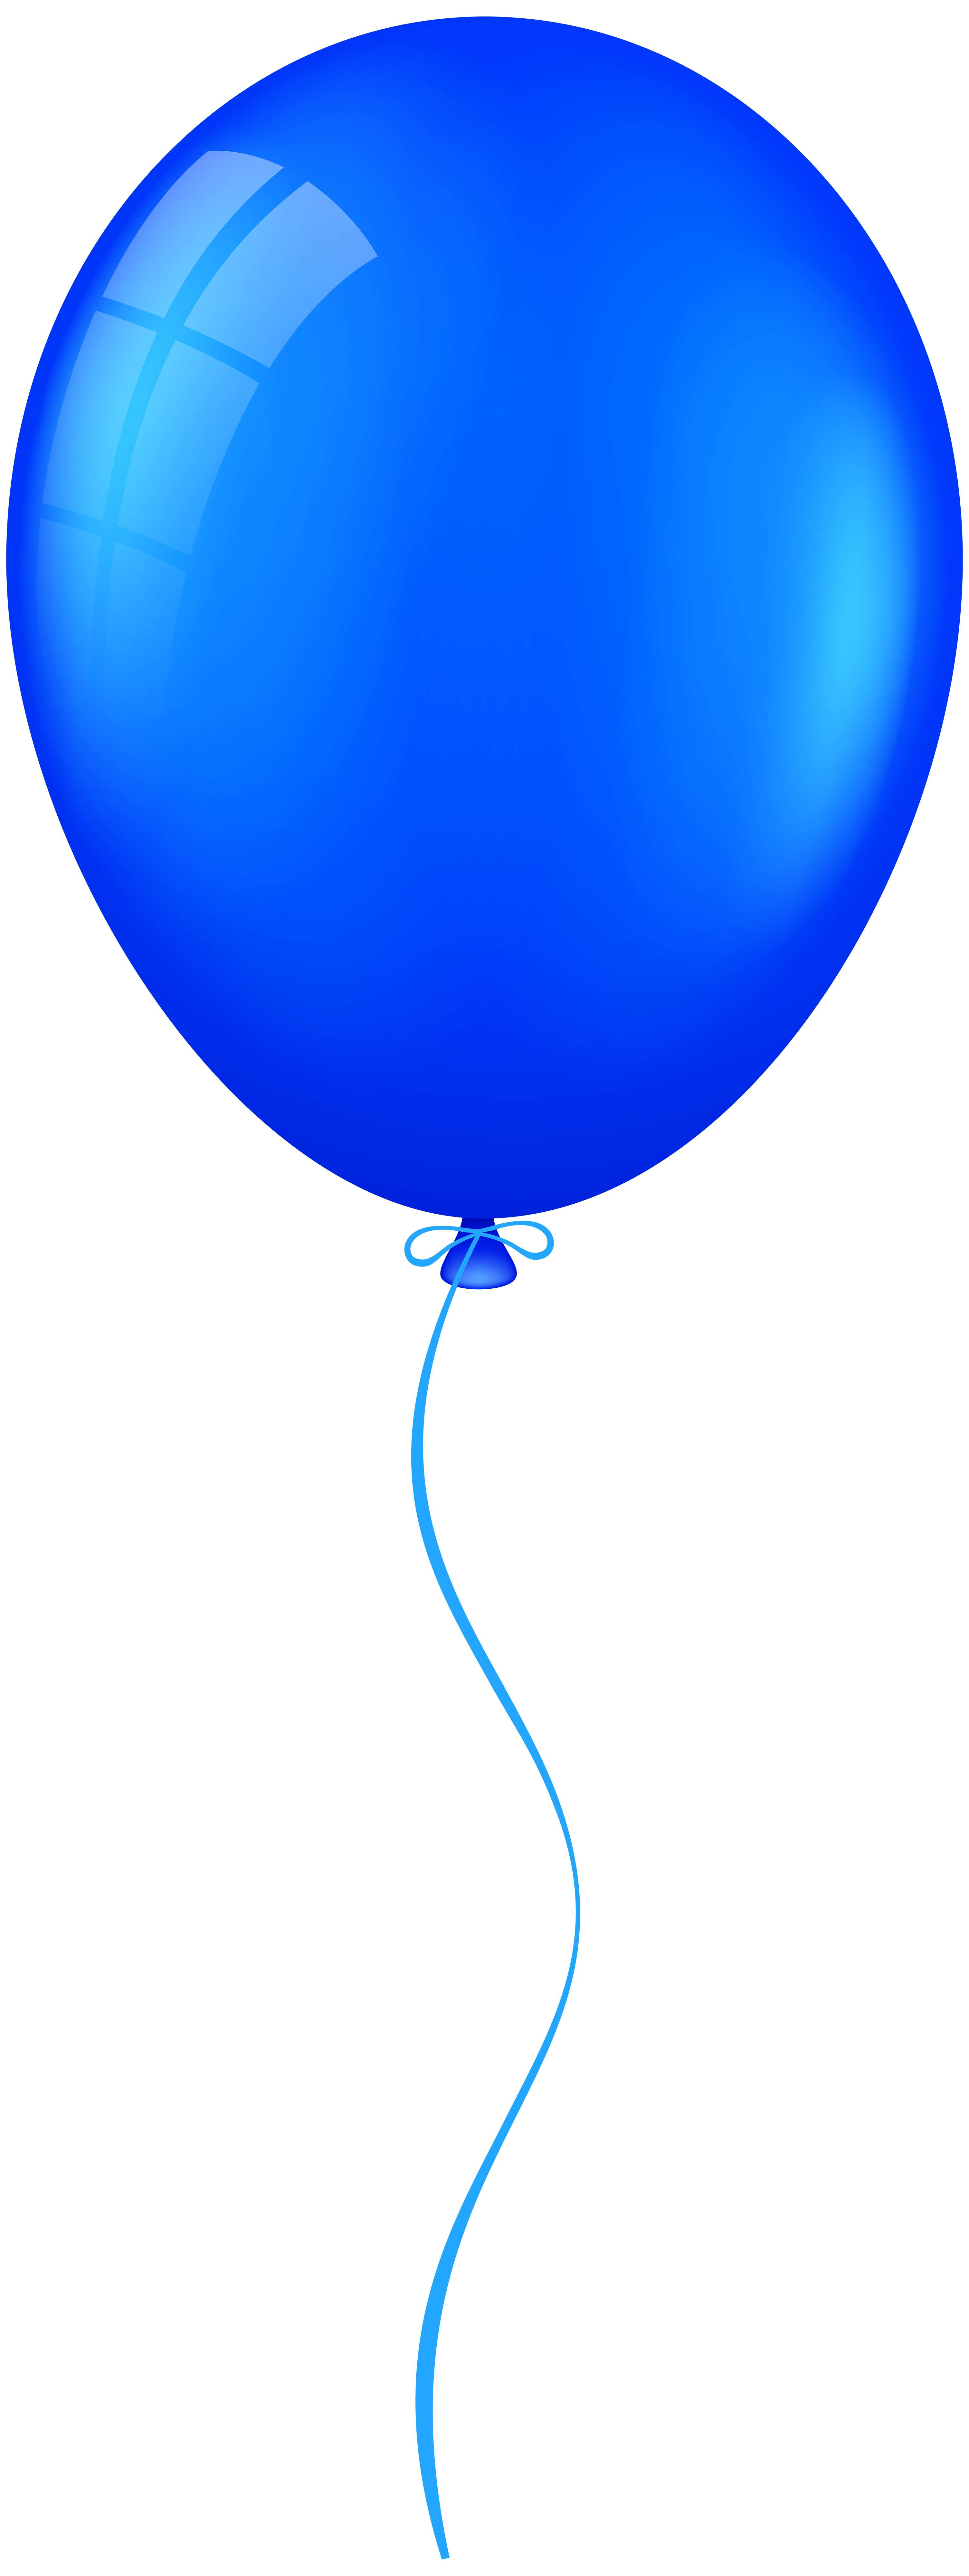 balloon clipart png